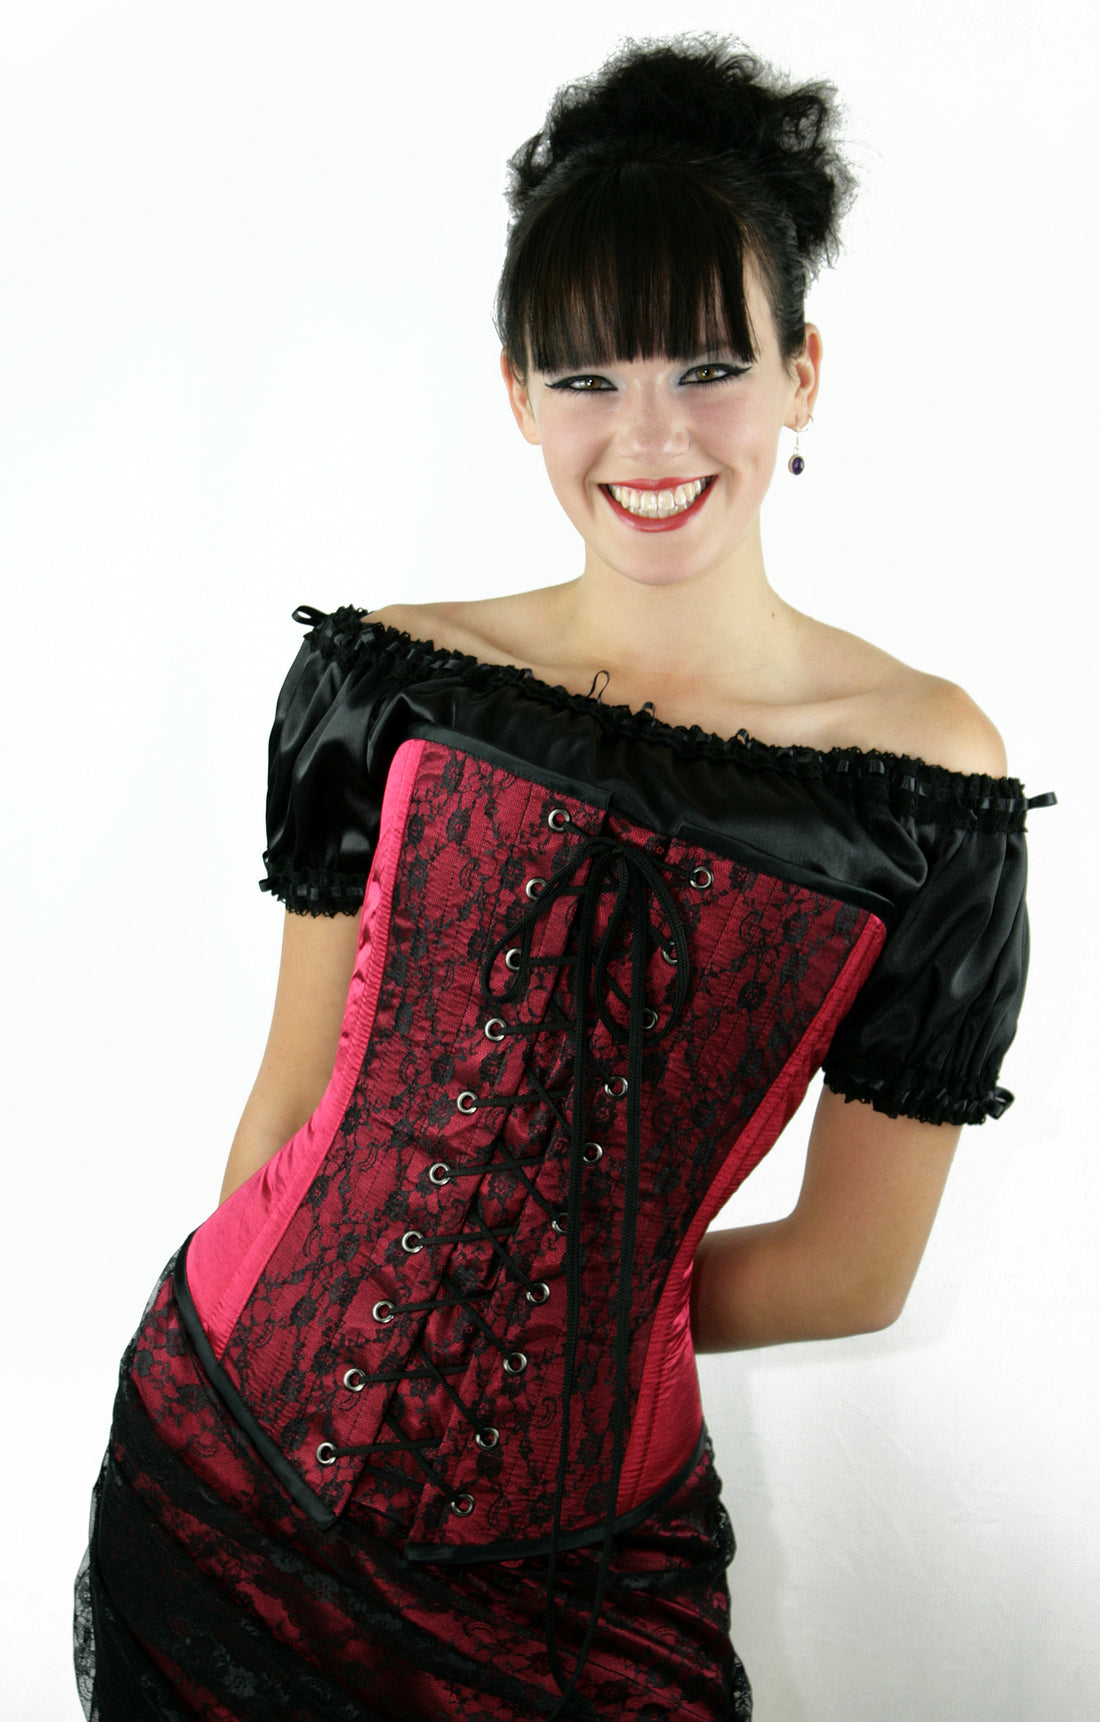 What We Can Do For Your Older GS Corset